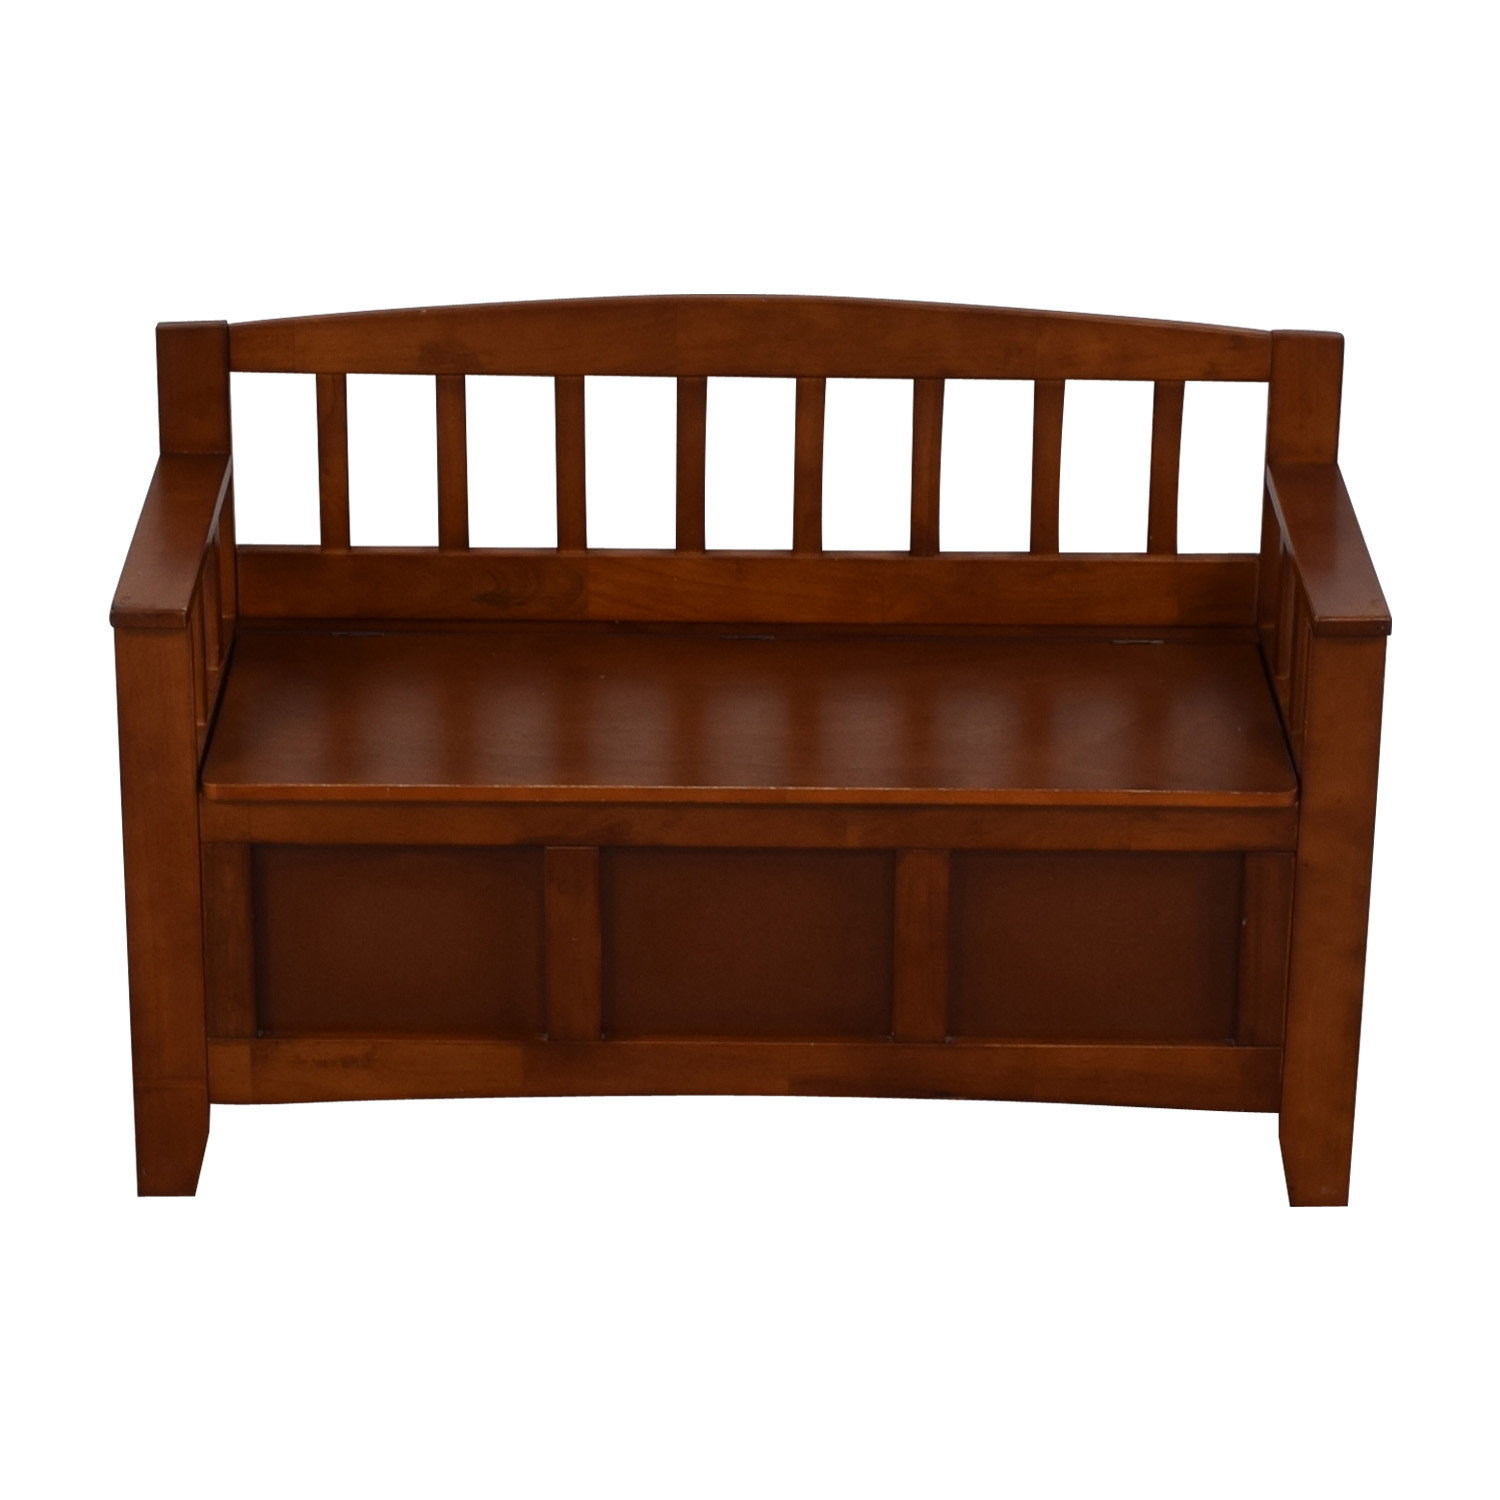 Used Storage Bench
 OFF Wood Storage Bench Chairs